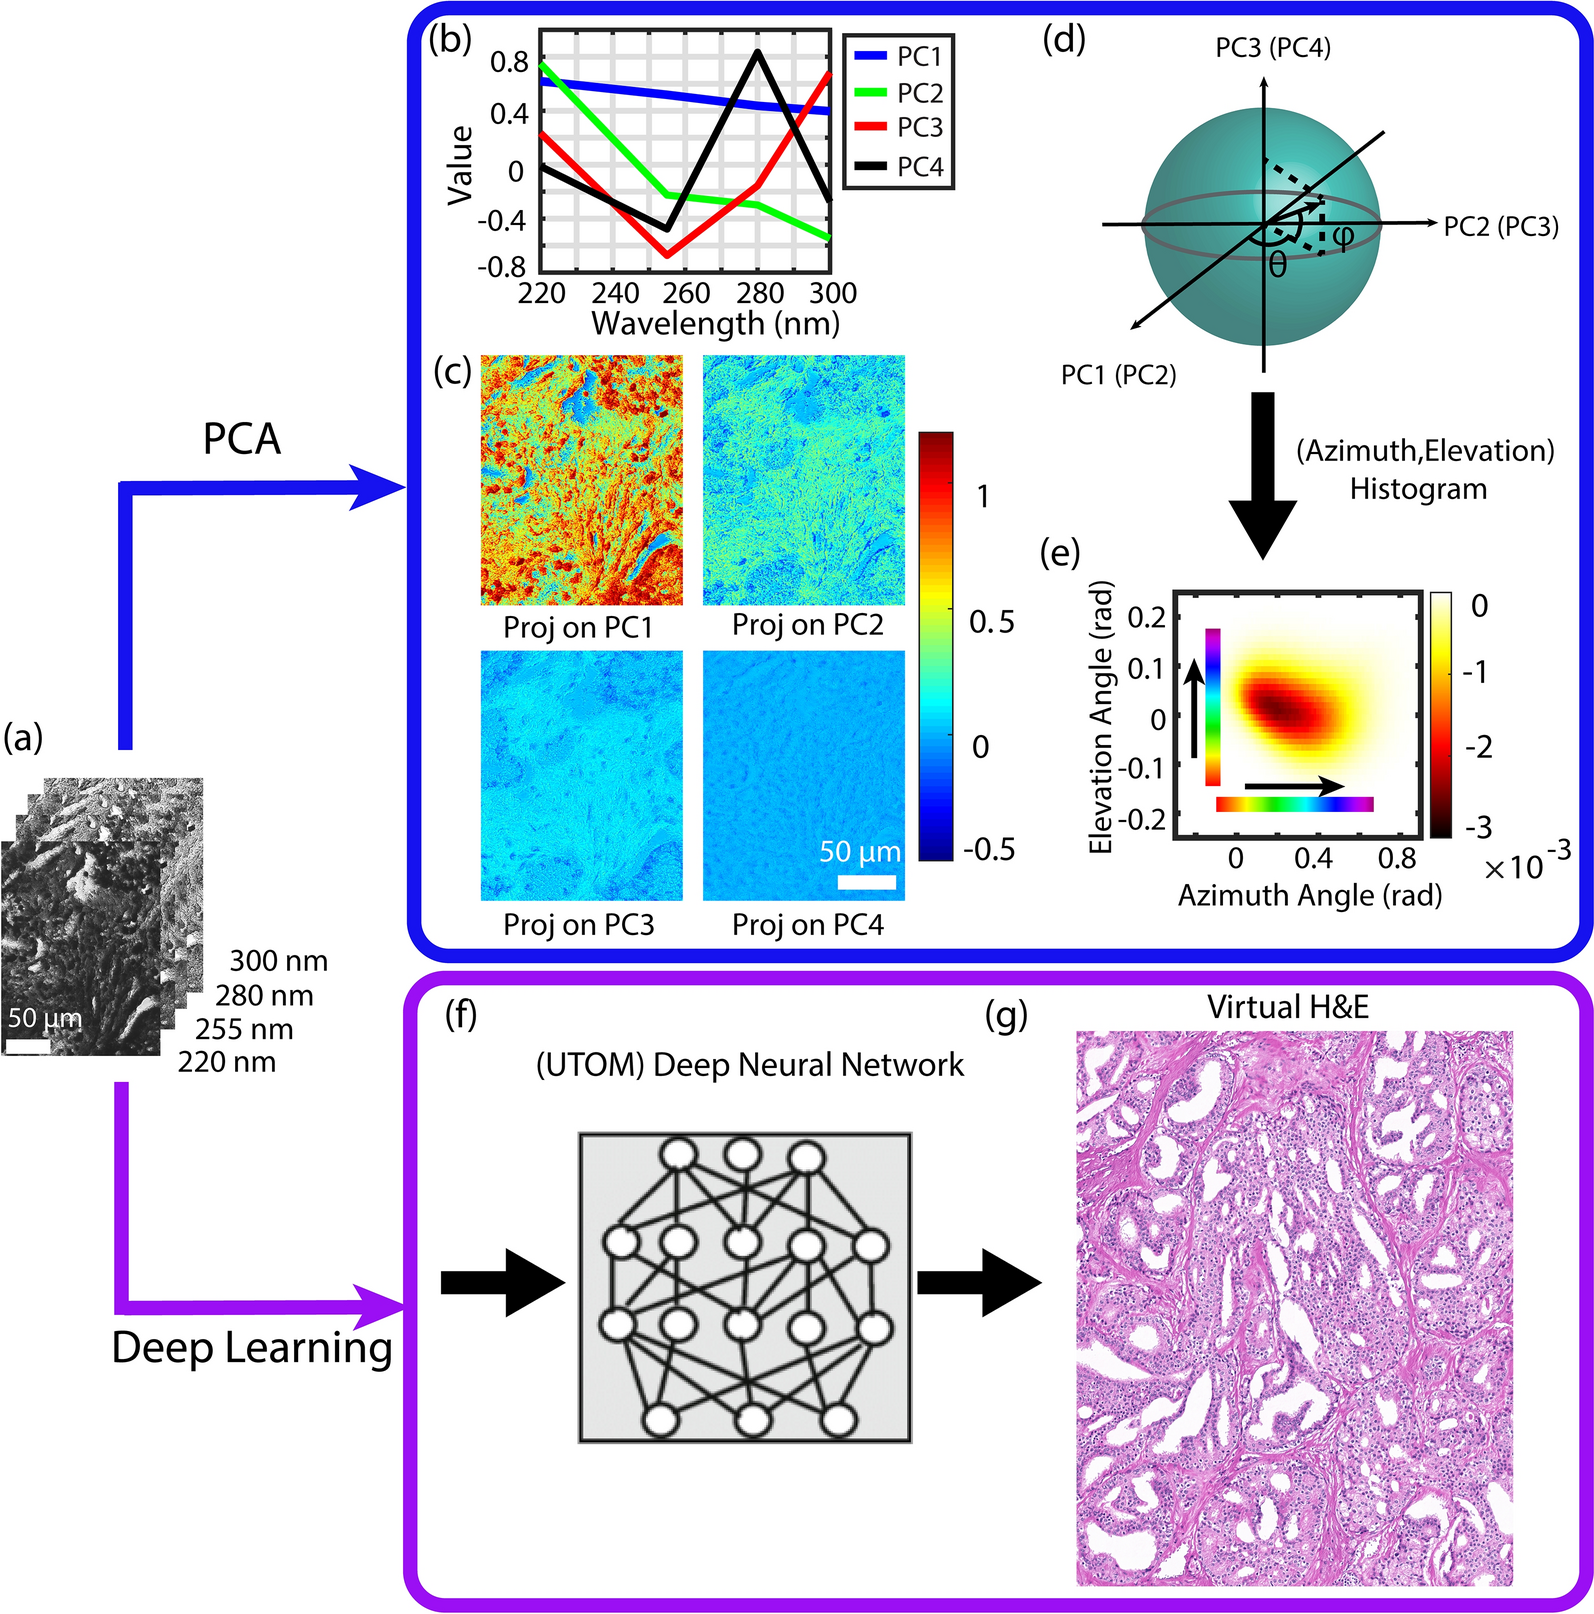 Prostate cancer histopathology using label-free multispectral deep-UV microscopy phenotypes of tumor aggressiveness and enables multiple diagnostic virtual stains | Scientific Reports